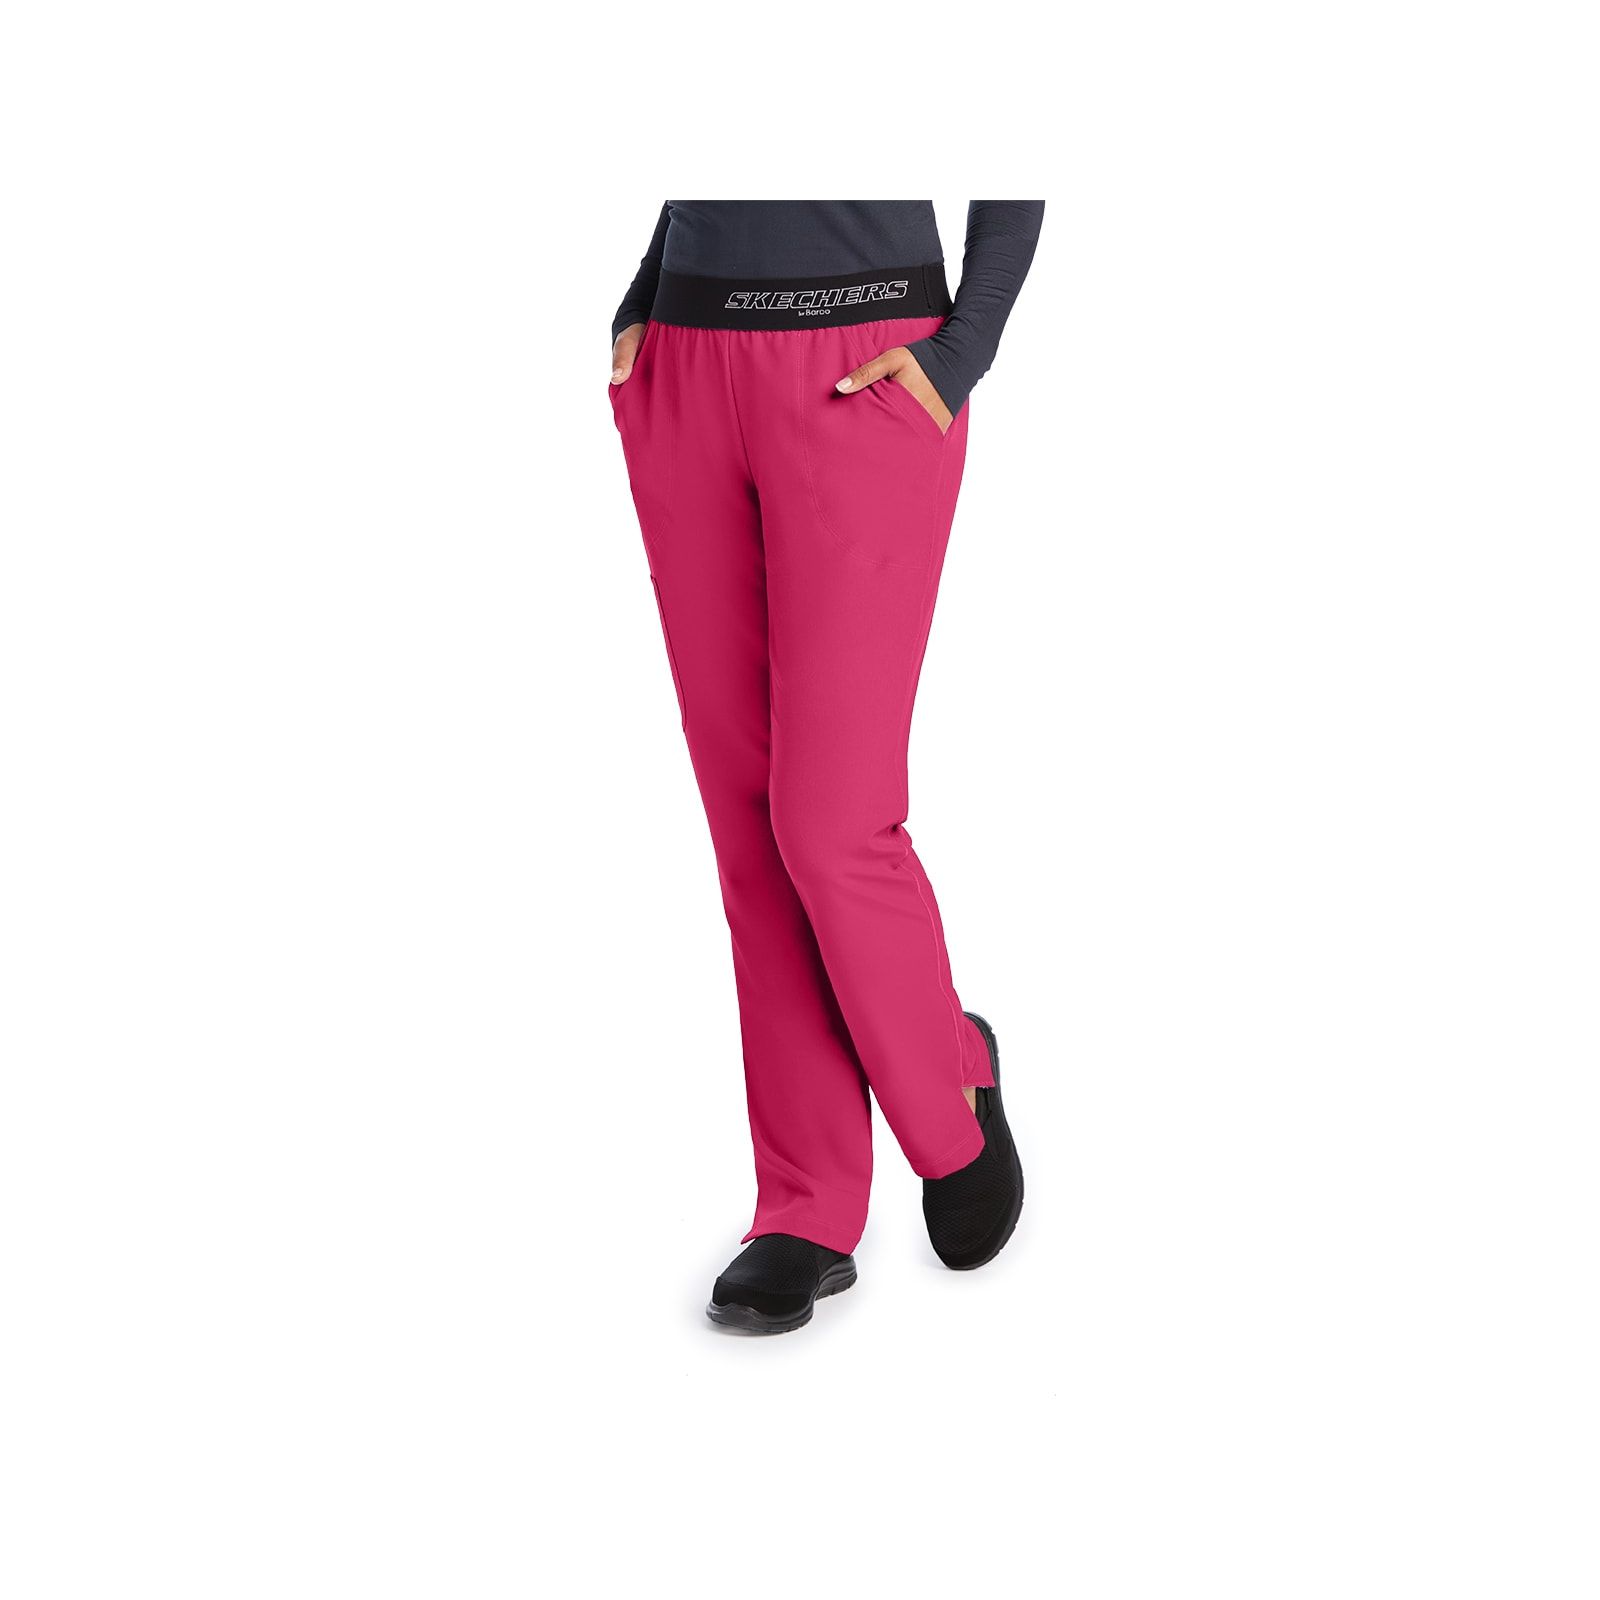 Shop for Skechers | Trousers | Womens | online at Lookagain